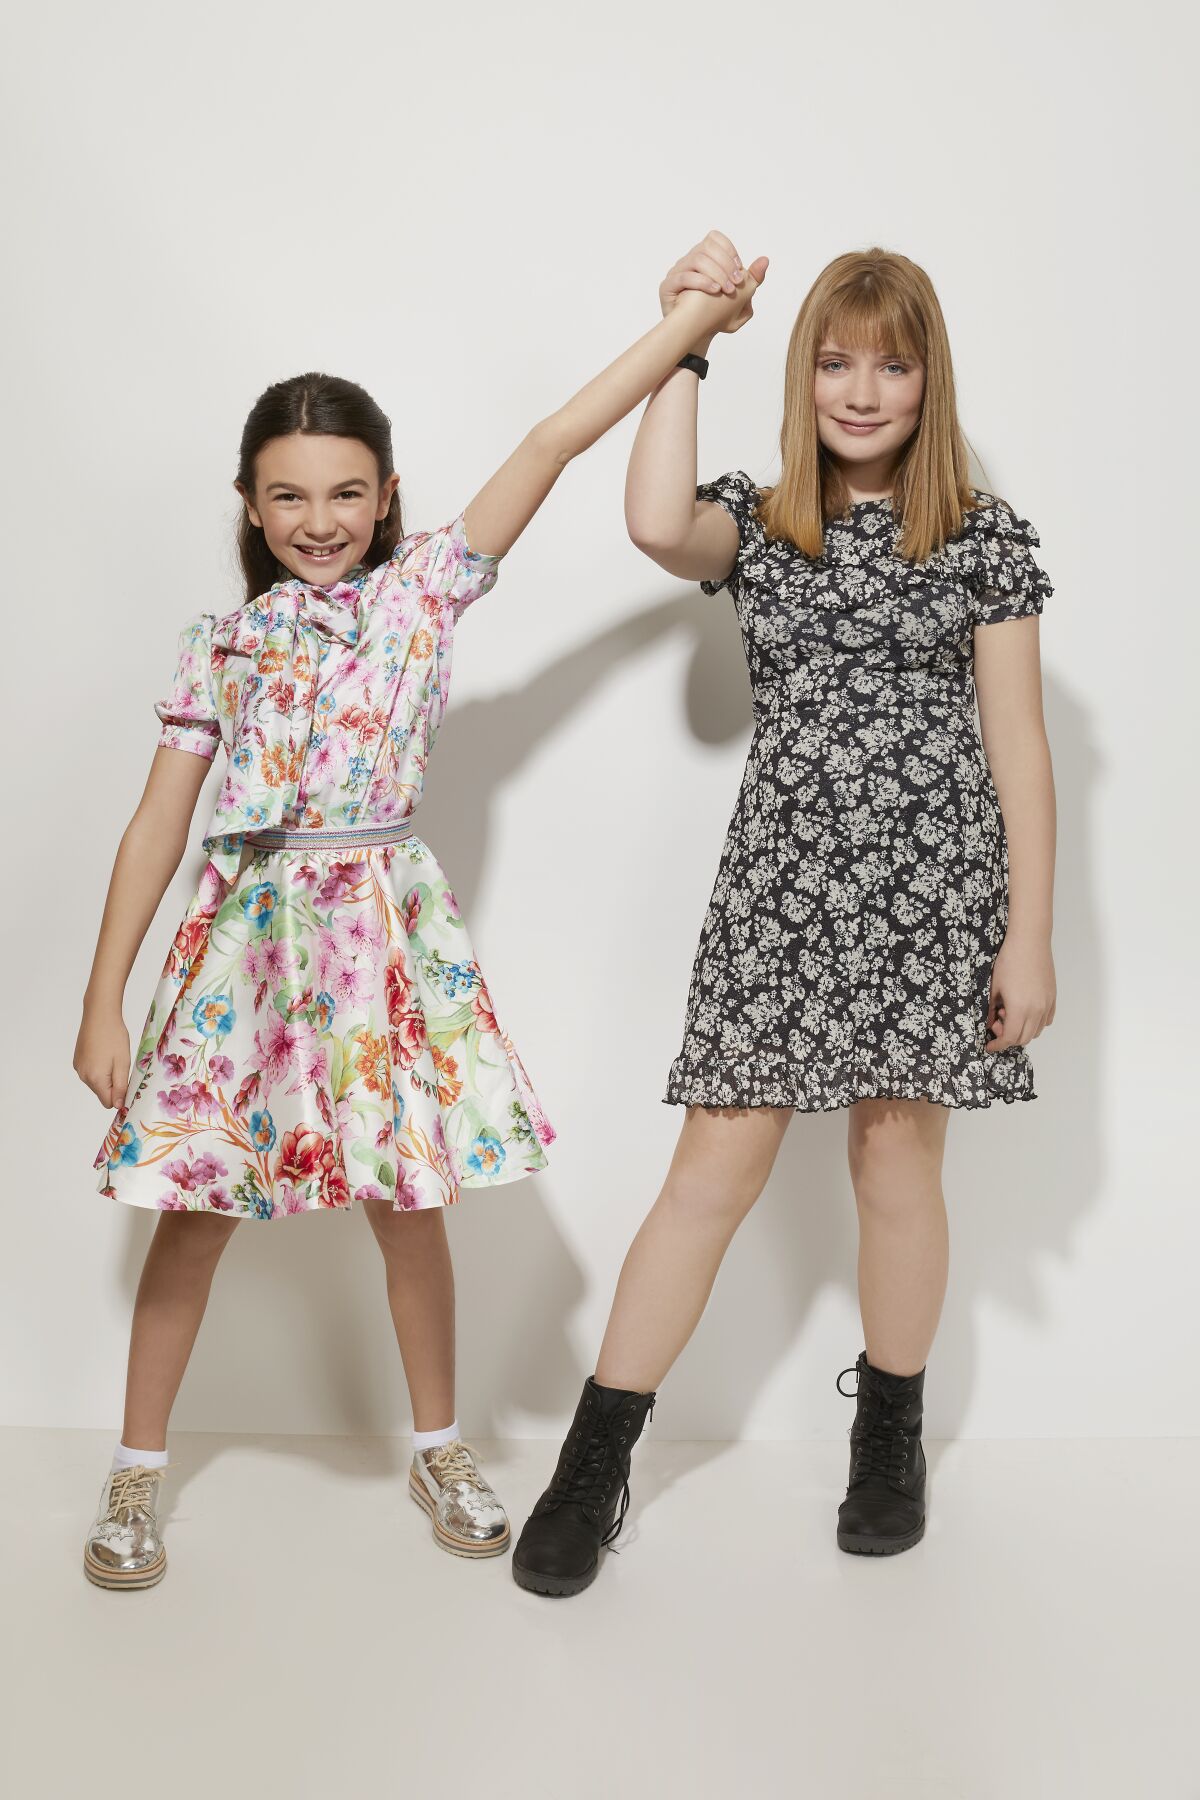 Brooklynn Prince and Hilde Lysiak of Apple TV+'s "Home Before Dark" pose for a portrait during the Television Critics Assn. biannual press tour in Pasadena in January.